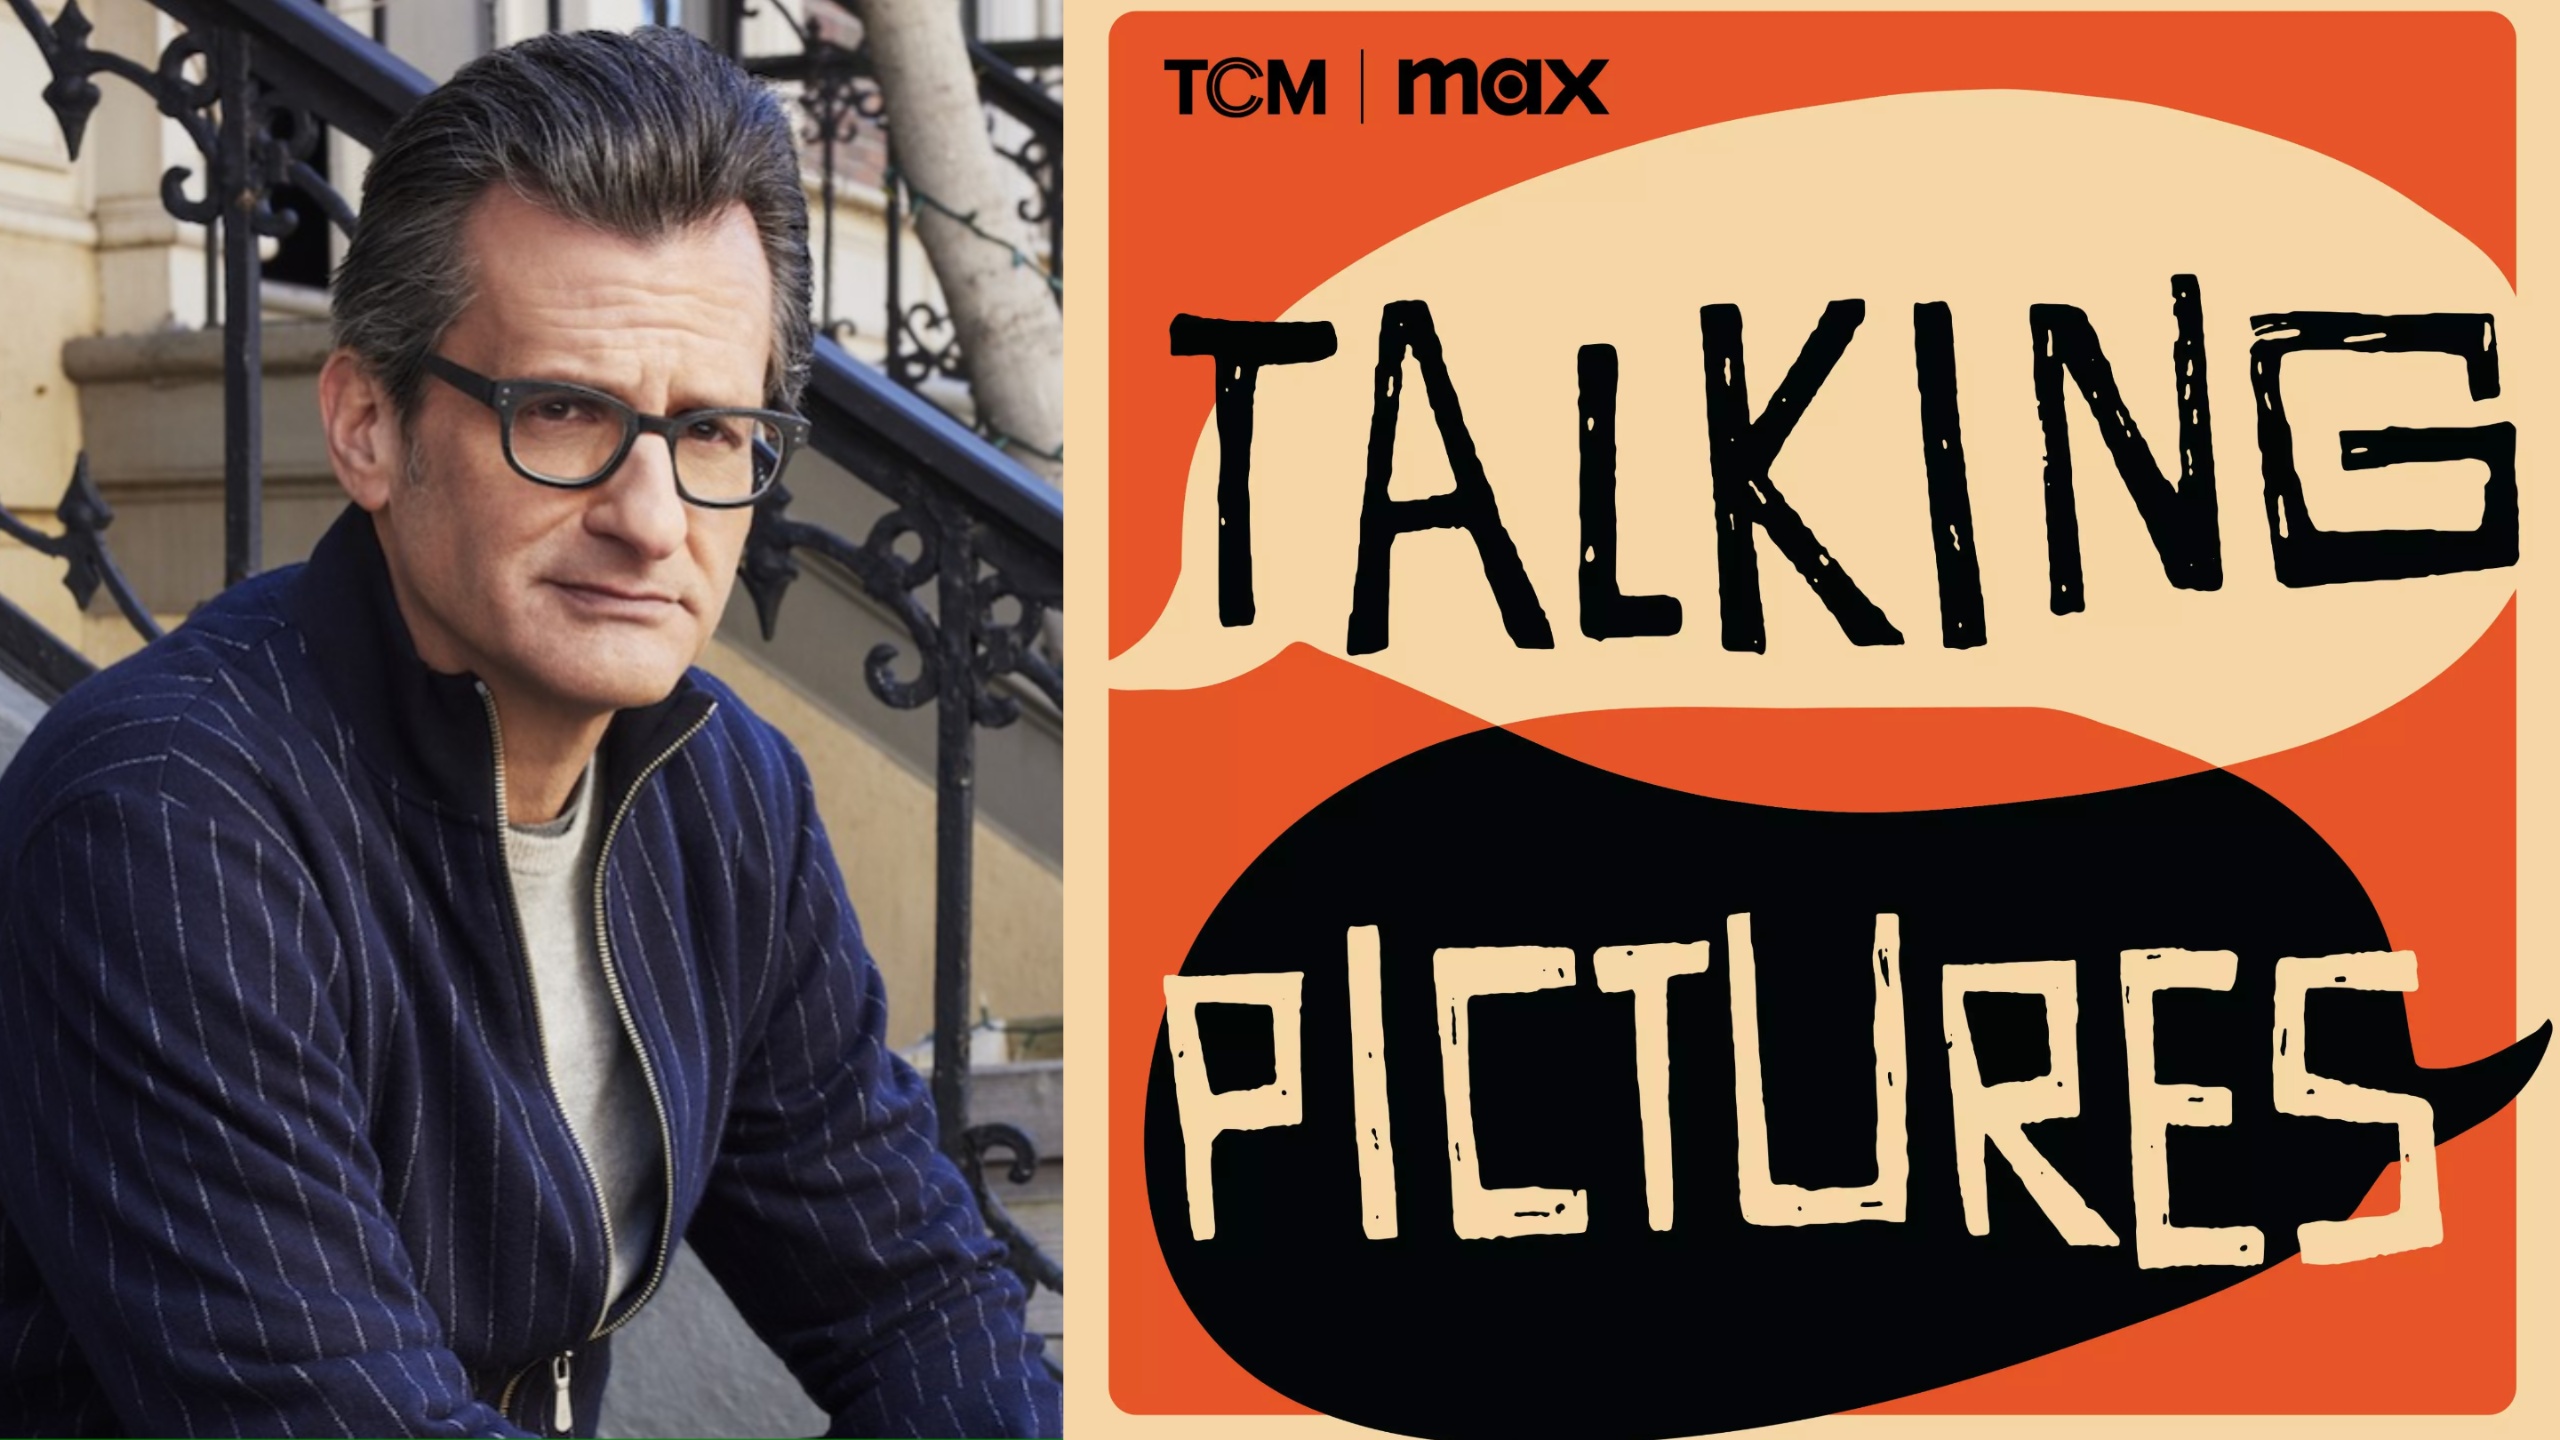 Ben-Mankiewicz-Talking-Pictures-Podcast-S2-TCM-Max.jpg